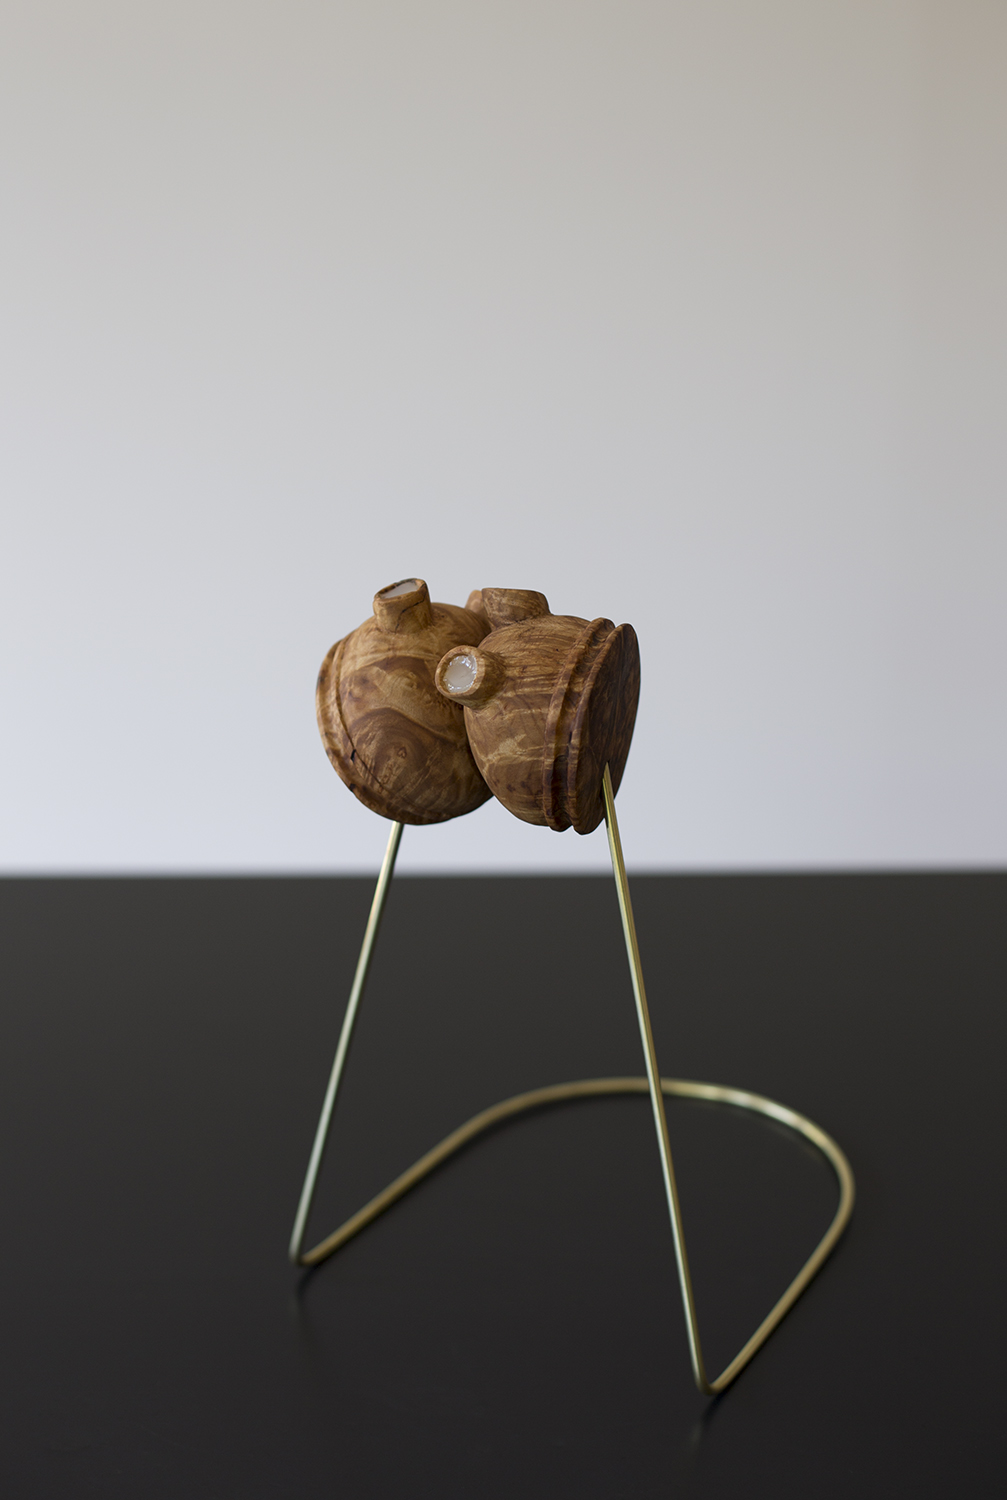 Un-Break the Heart. Wood, brass and silicone. 2014